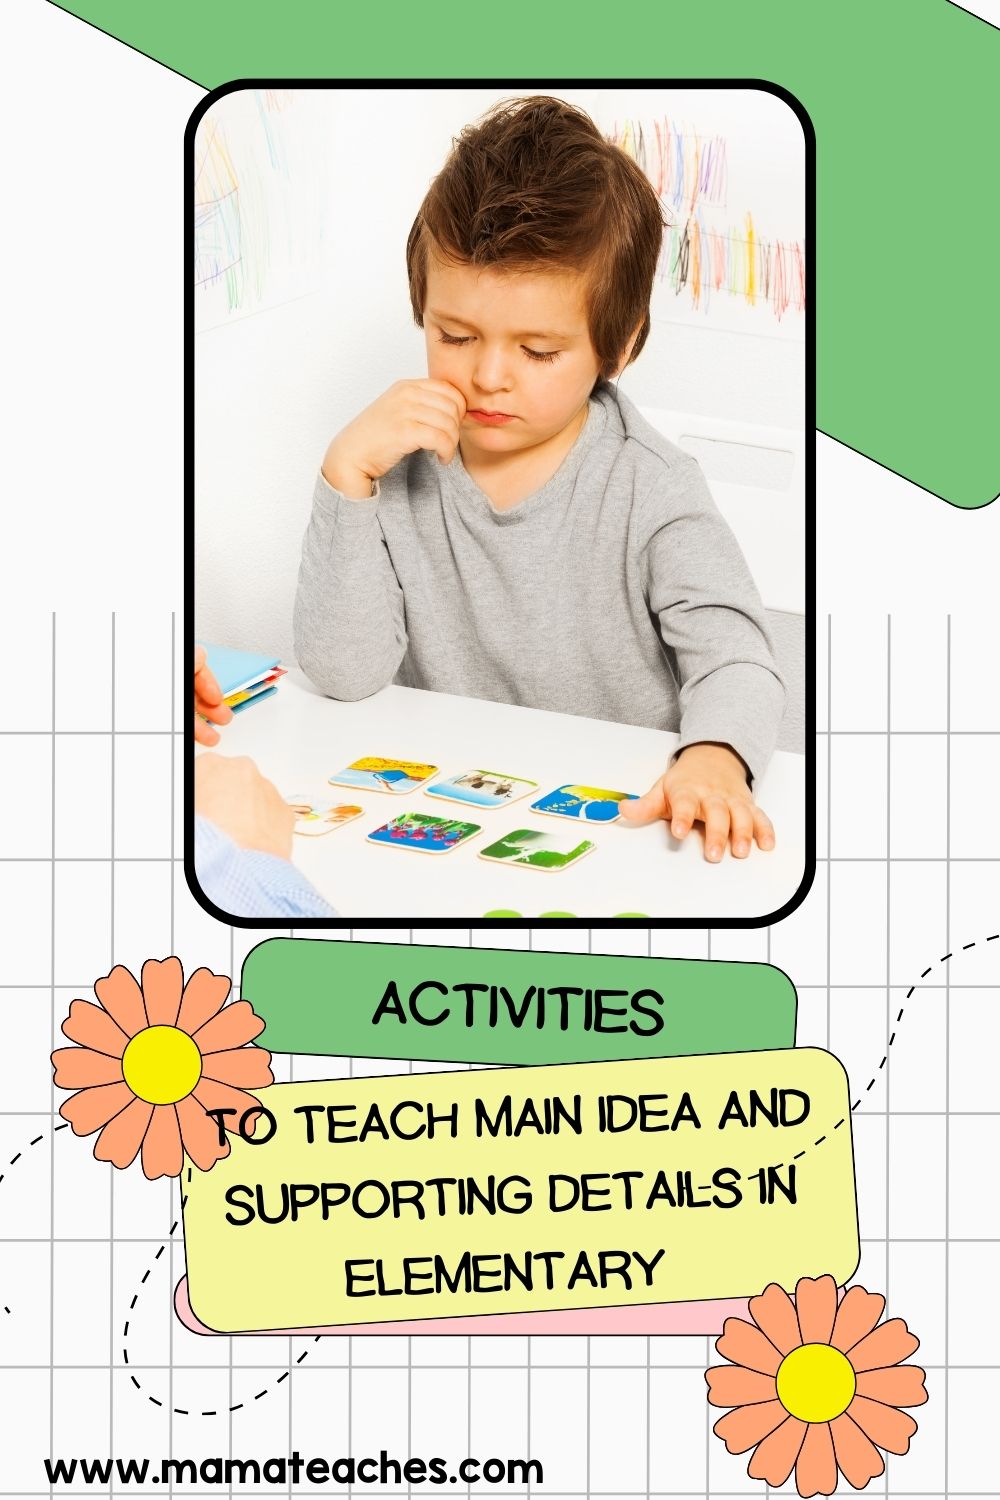 Activities to Teach Main Idea and Supporting Details in Elementary